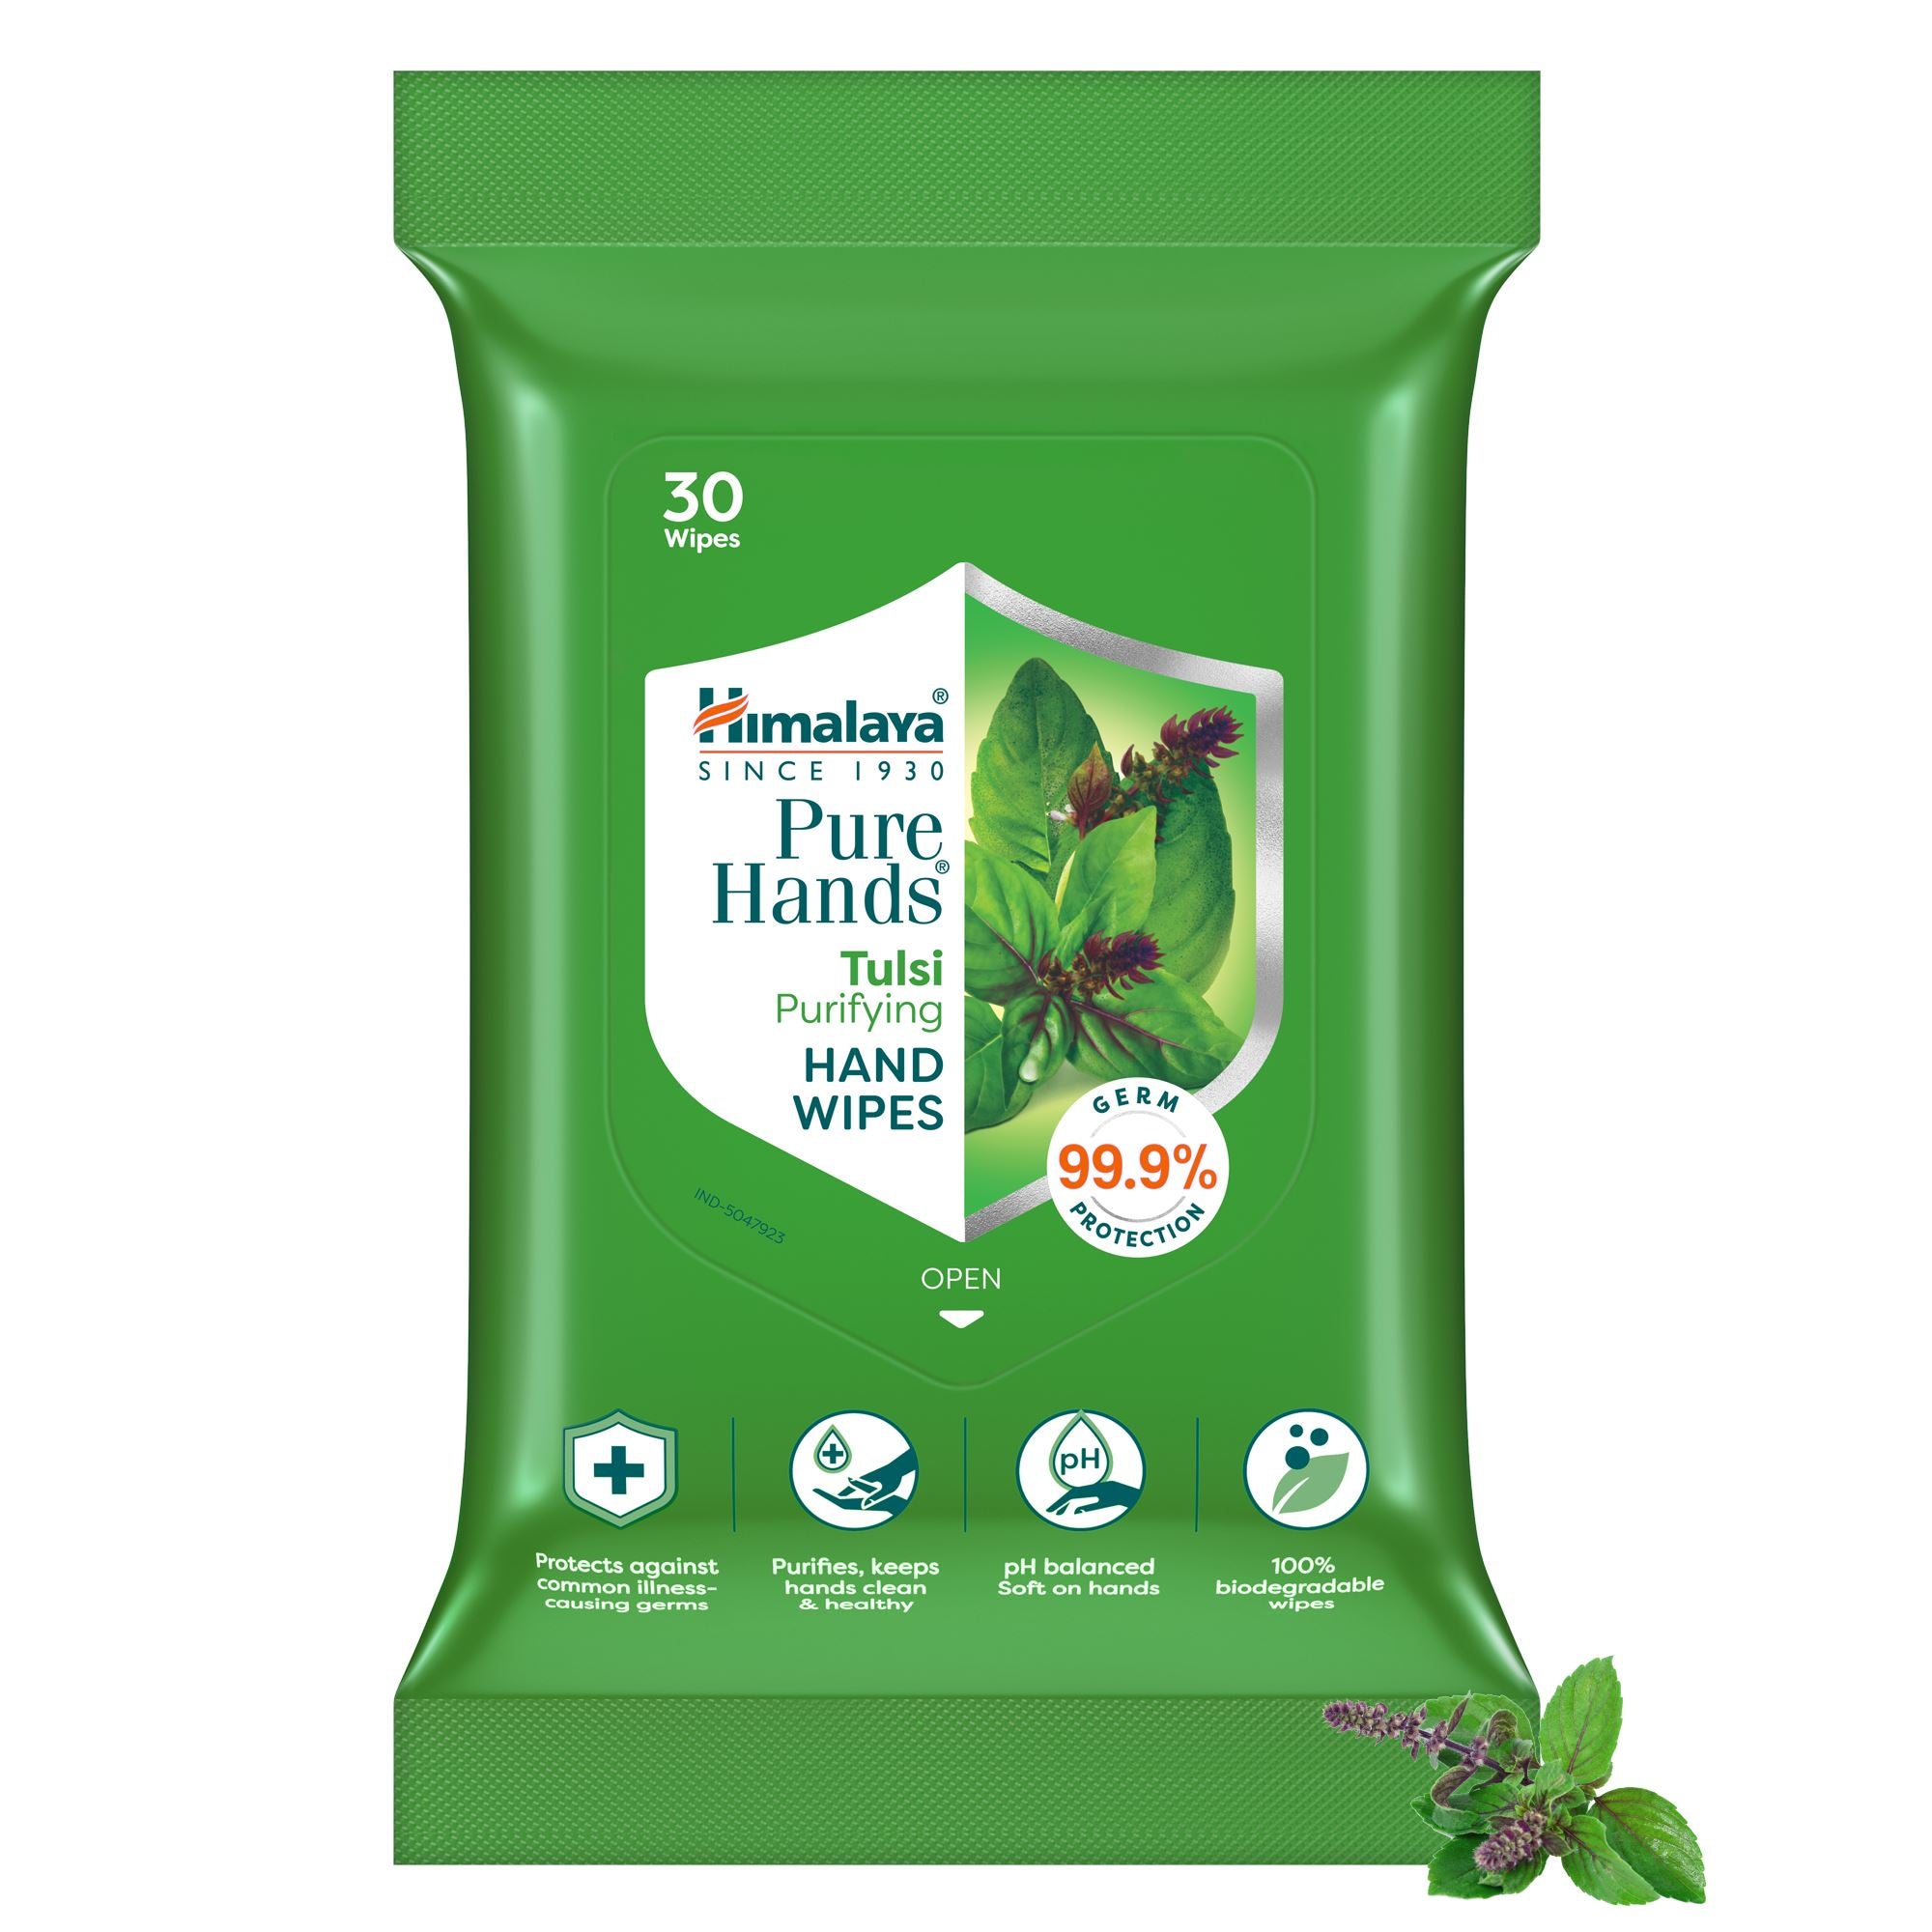 Himalaya Pure Hands Tulsi Purifying Hand Wipes - Sanitizing Wipes 30s